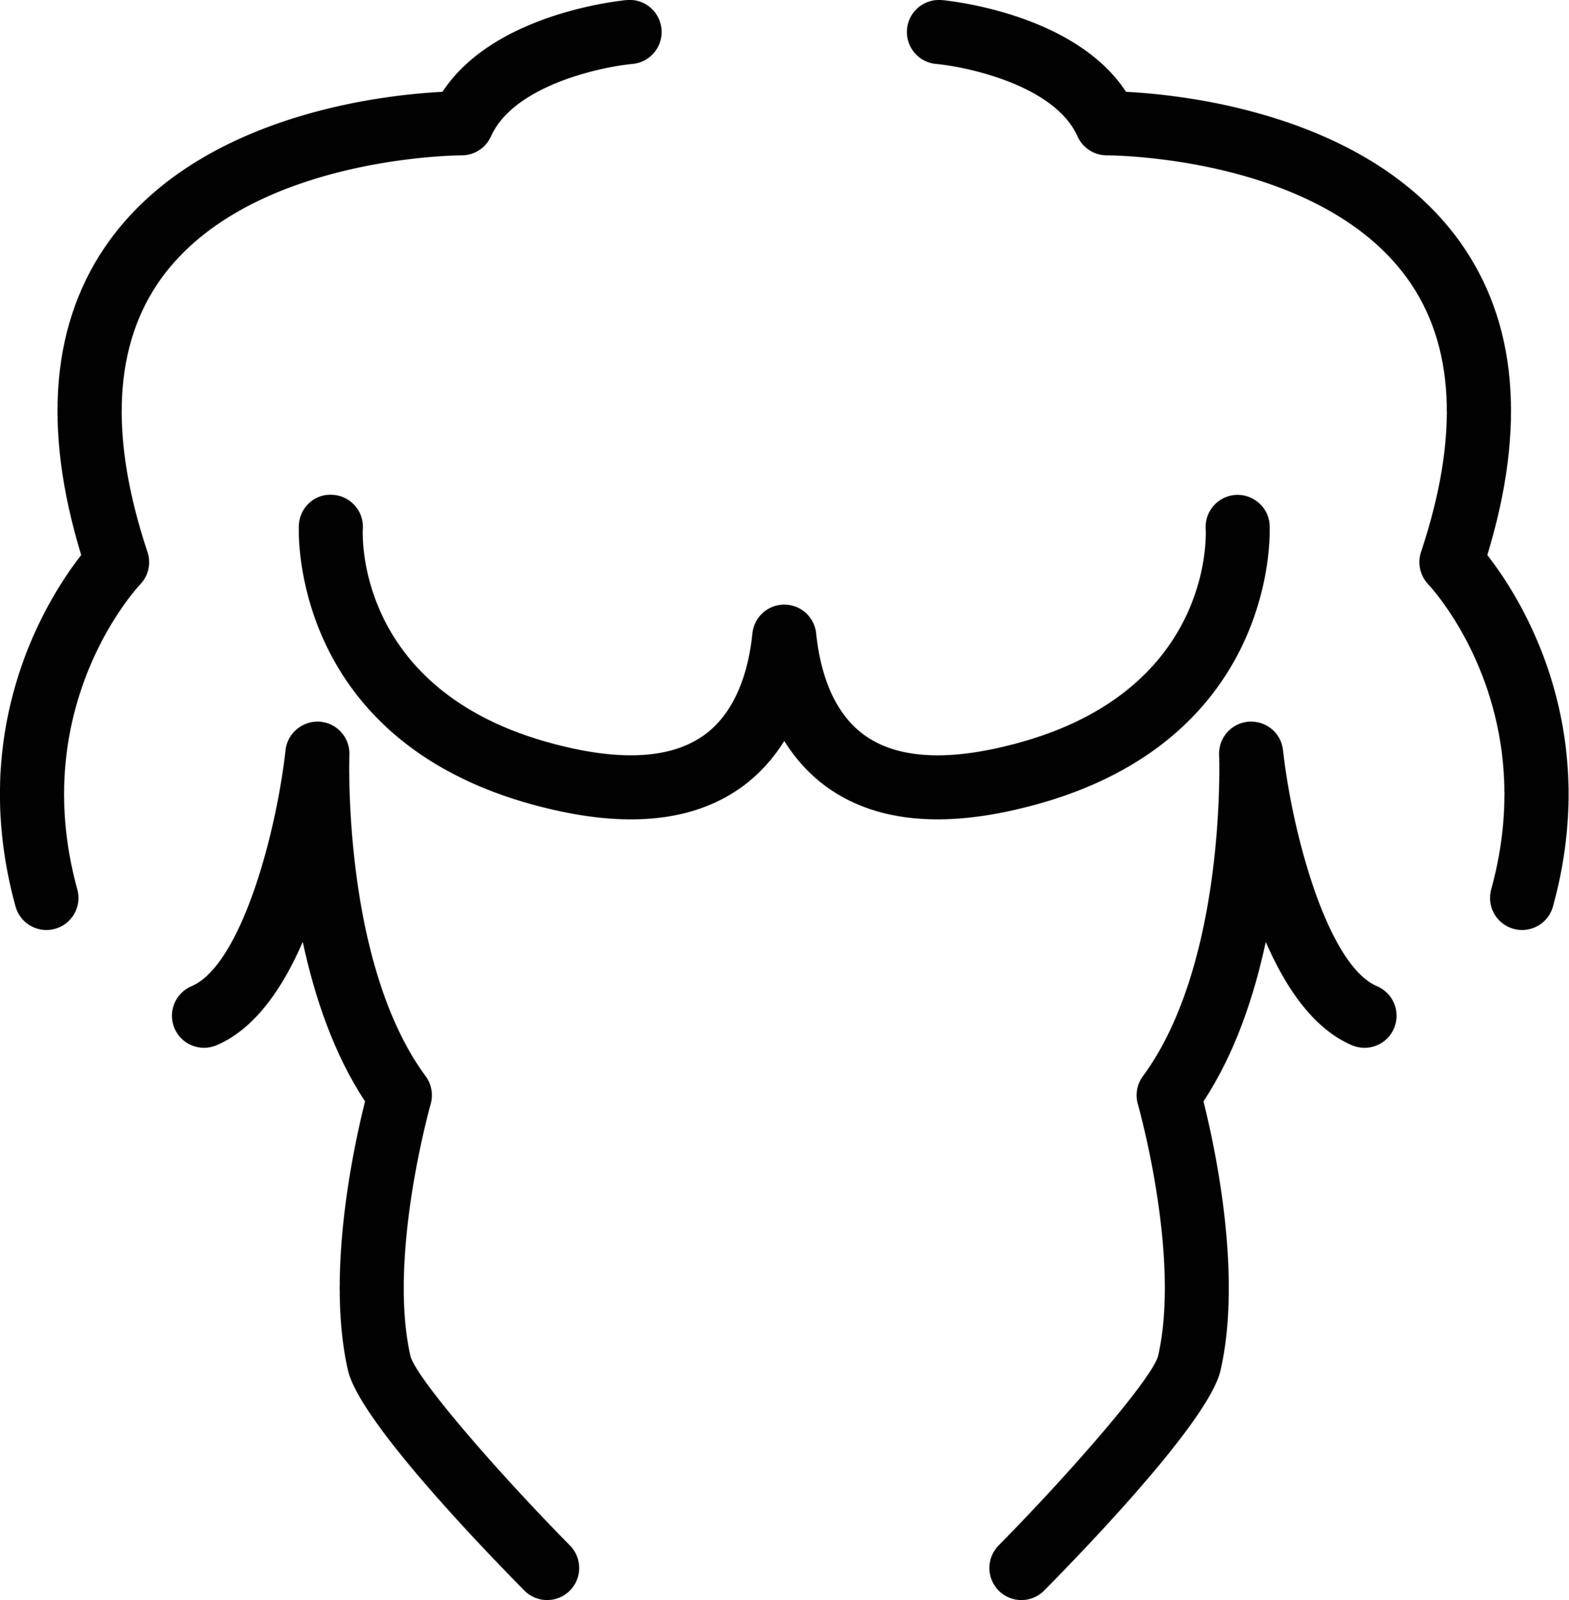 body builder Vector illustration on a transparent background. Premium quality symbols. Stroke vector icon for concept and graphic design.